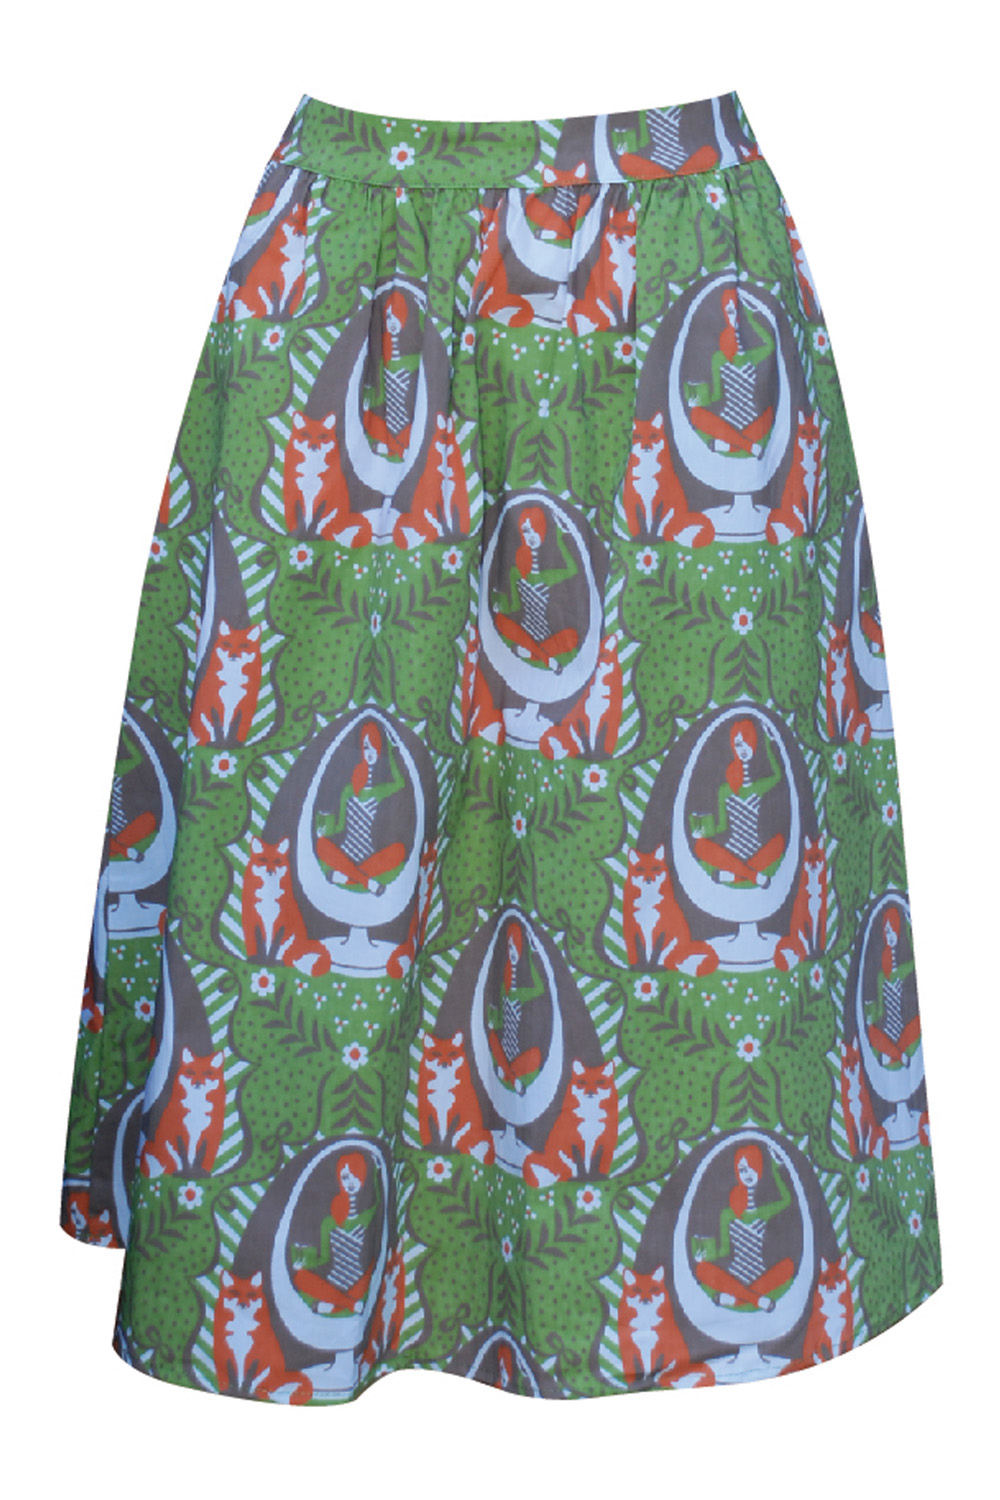 Midi skirt with foxes and girls sitting in egg chairs in orange, green and brown